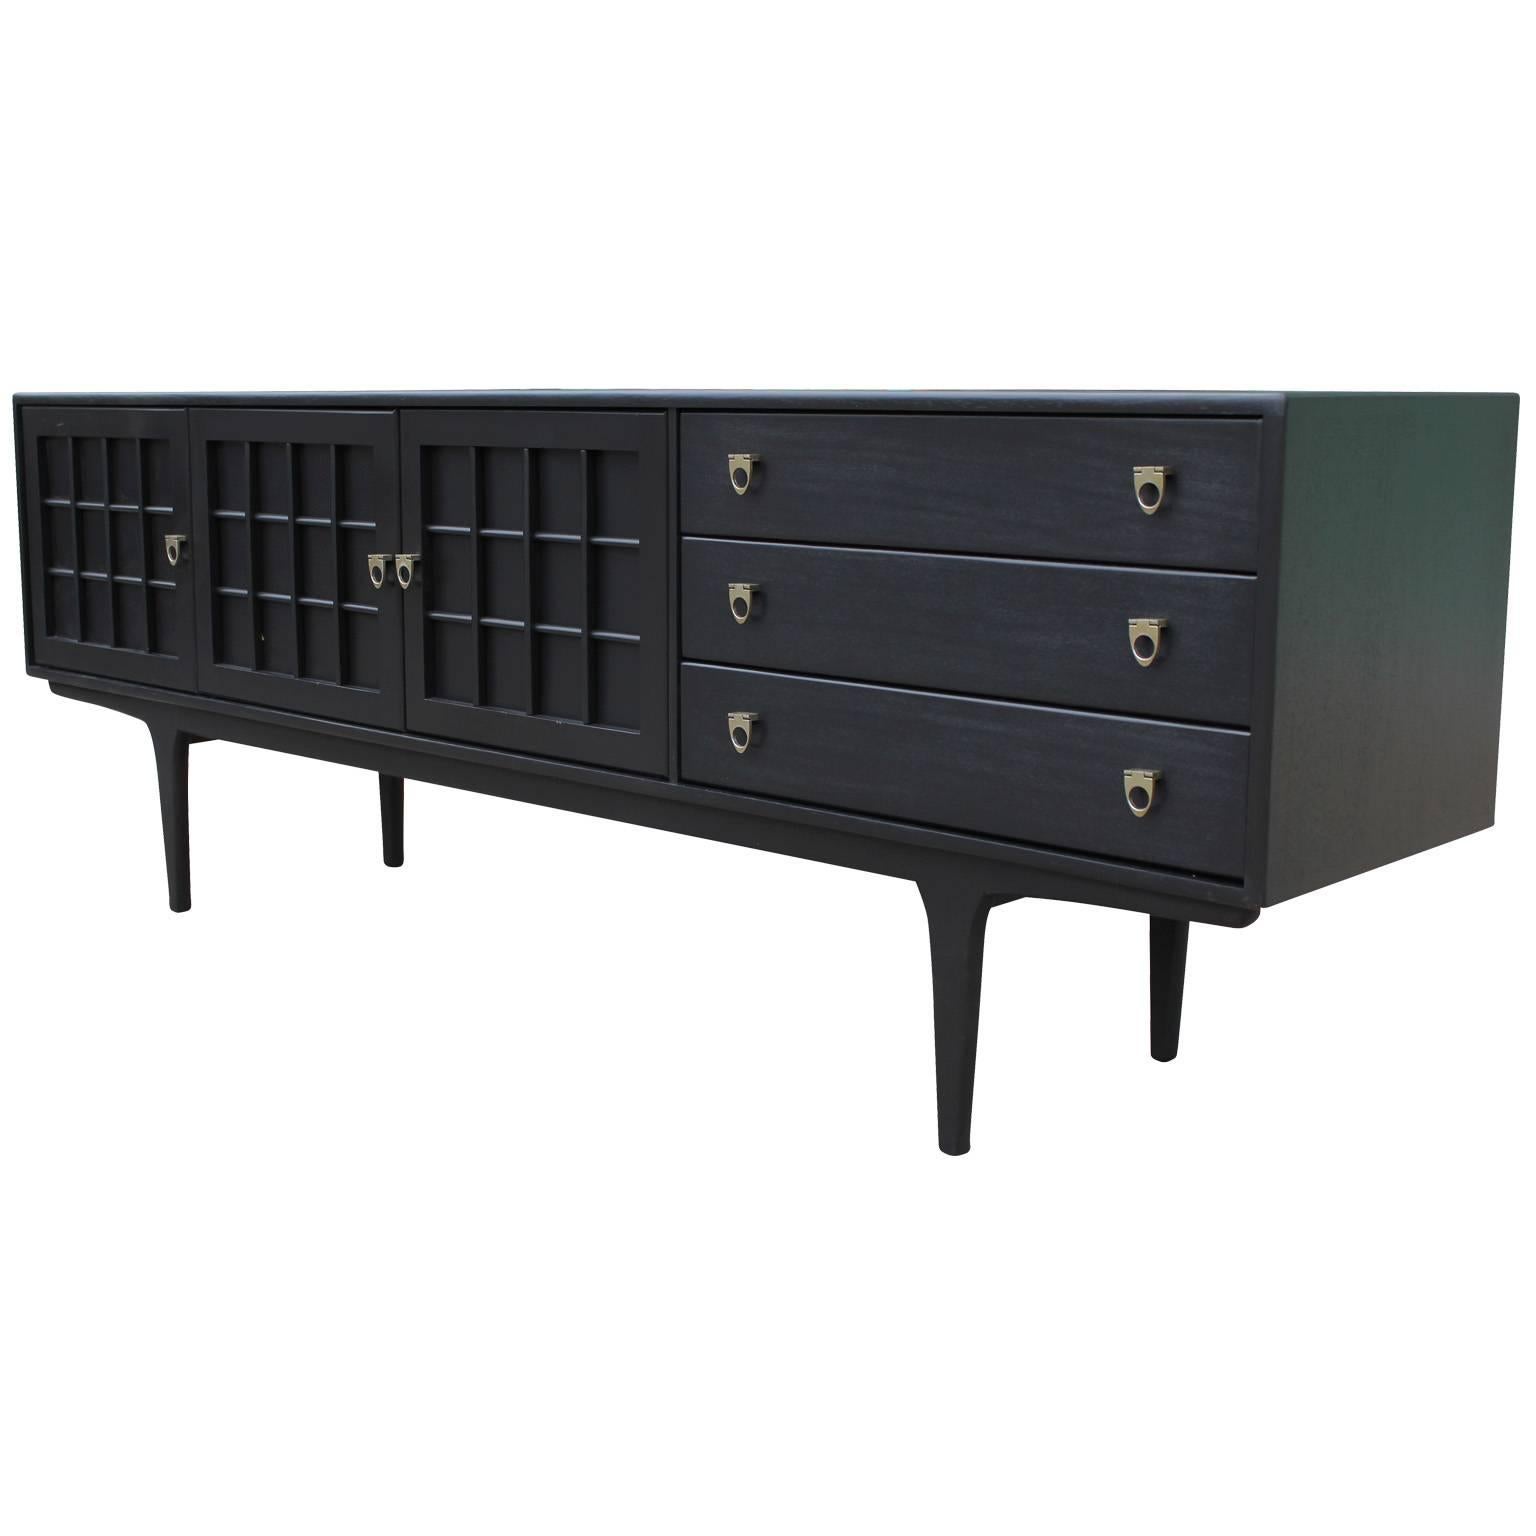 Ebony stained with brass handles. Sideboard / Credenza is finished in black lacquer with the grain still showing. Fully restored. Three cabinets doors and three drawers provide excellent storage. Aged brass hardware. 